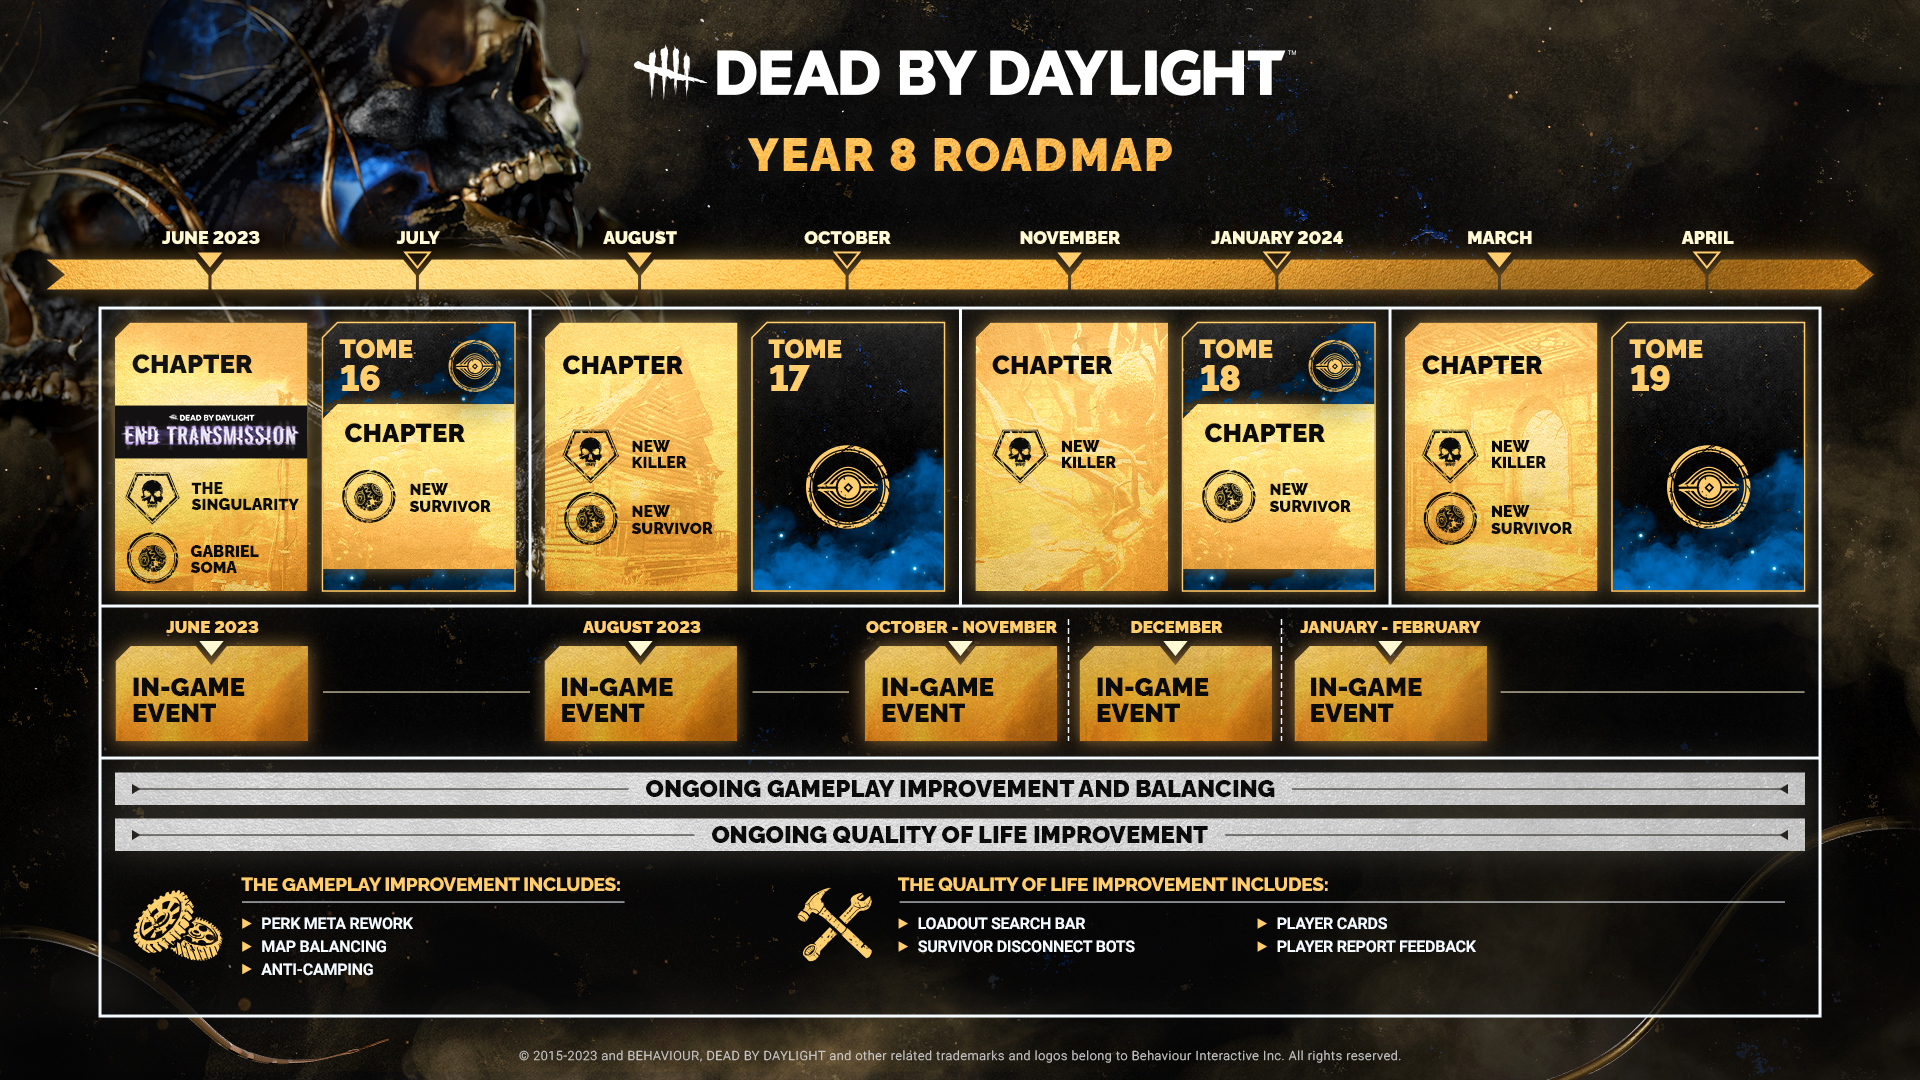 Dead by Daylight Year 8 content calendar